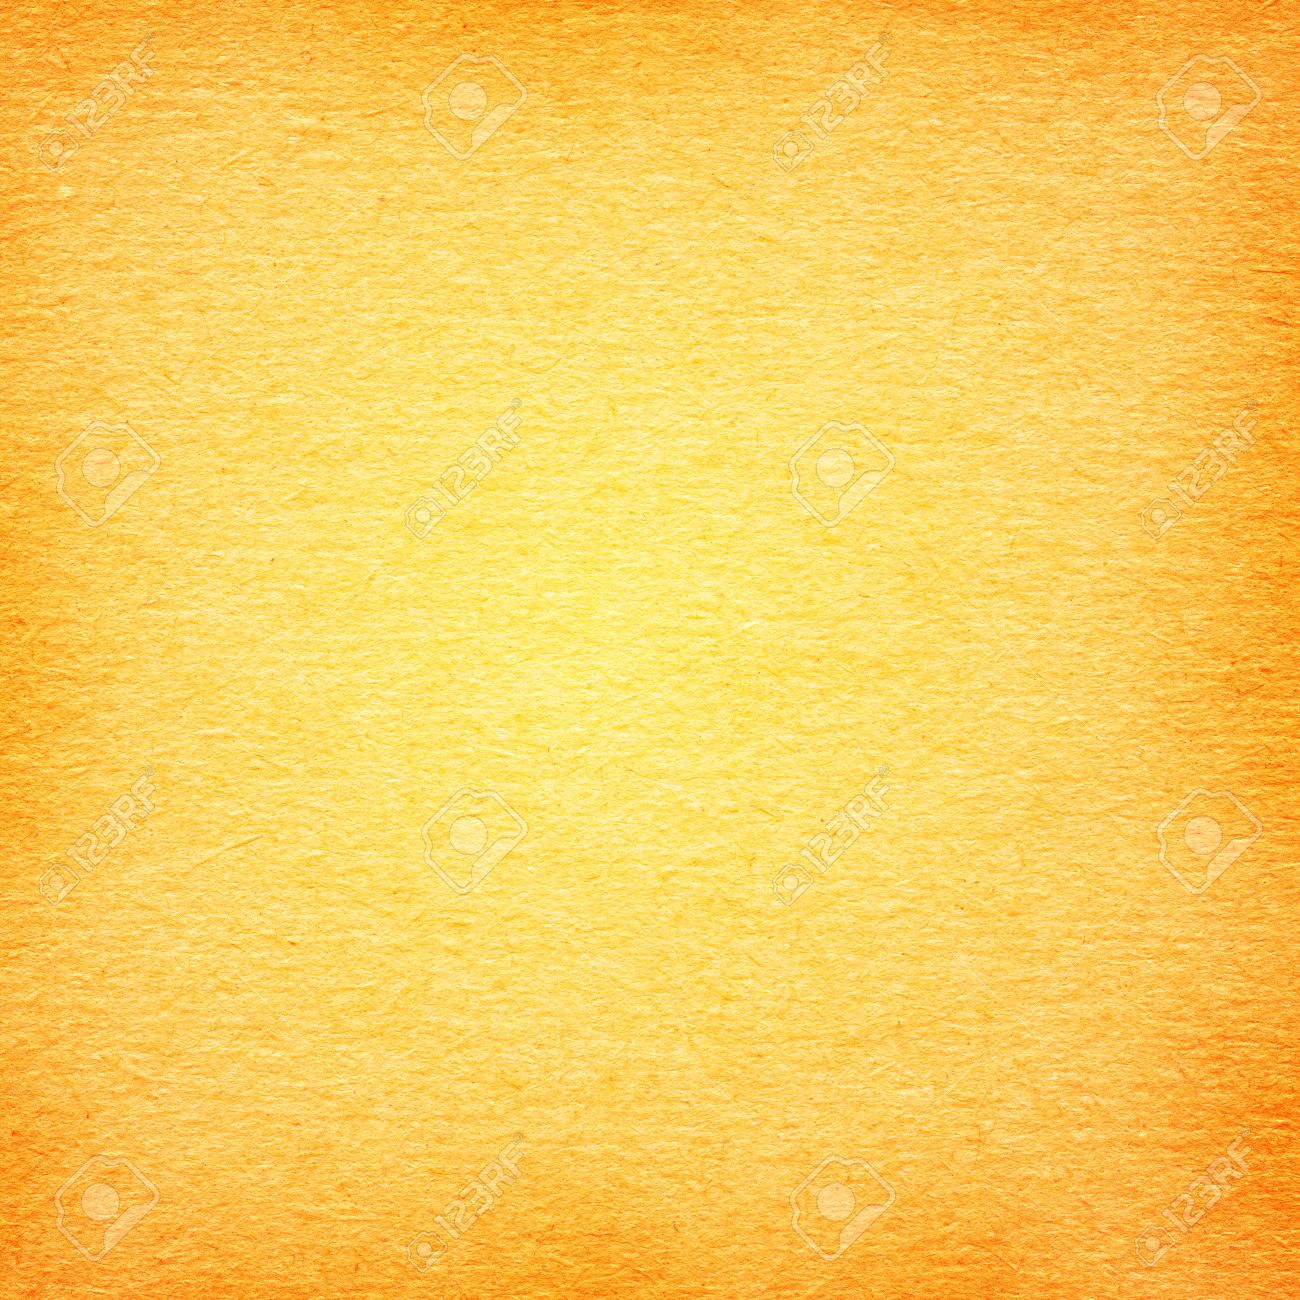 Background orange texture high quality images and videos